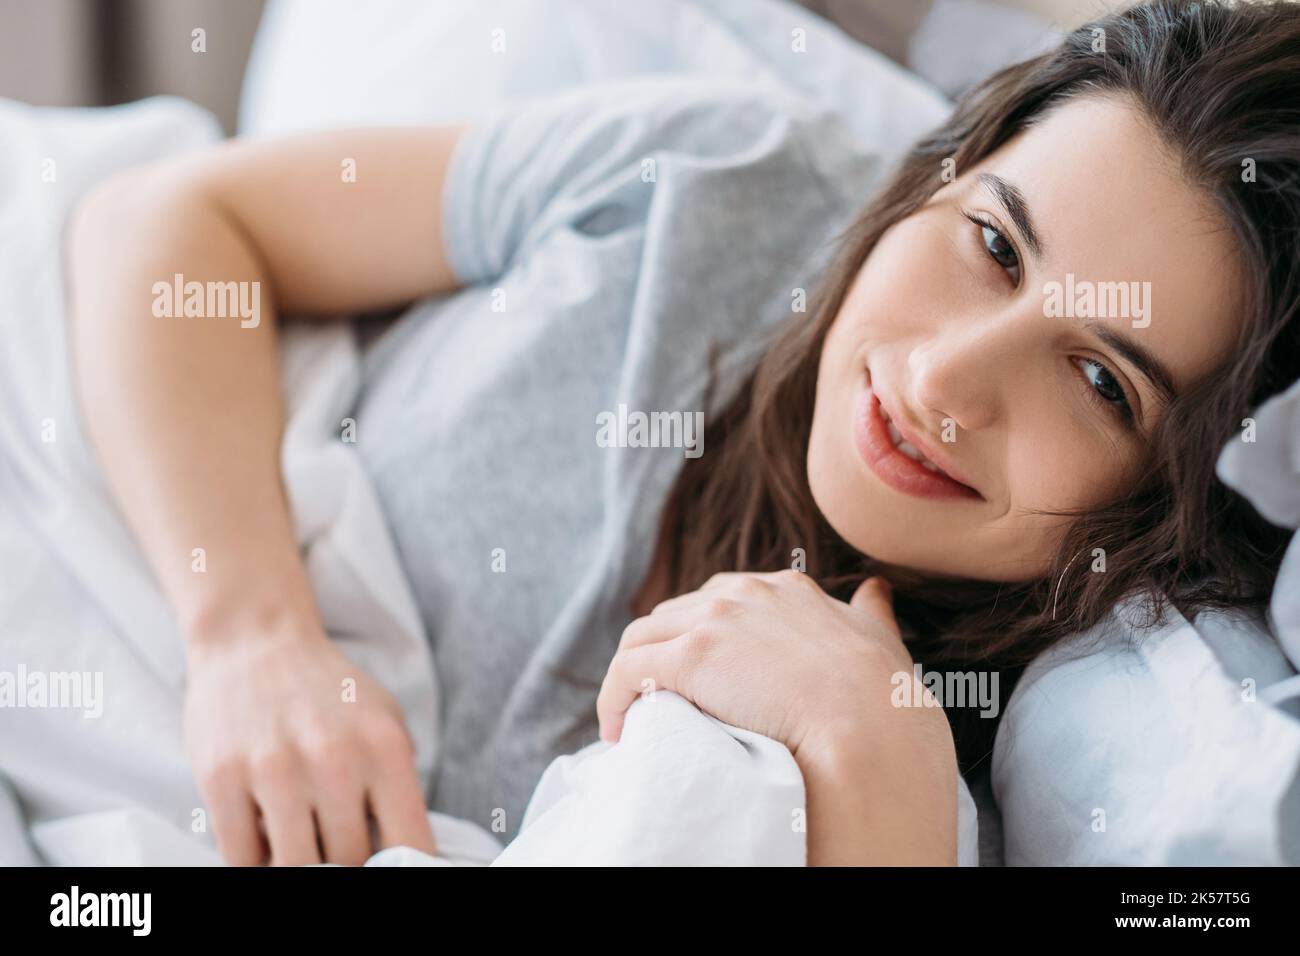 Good morning. Weekend rest. Home relaxation. Beauty health. Happy relaxed lazy woman enjoying lying awake in bed smiling looking at camera in light be Stock Photo